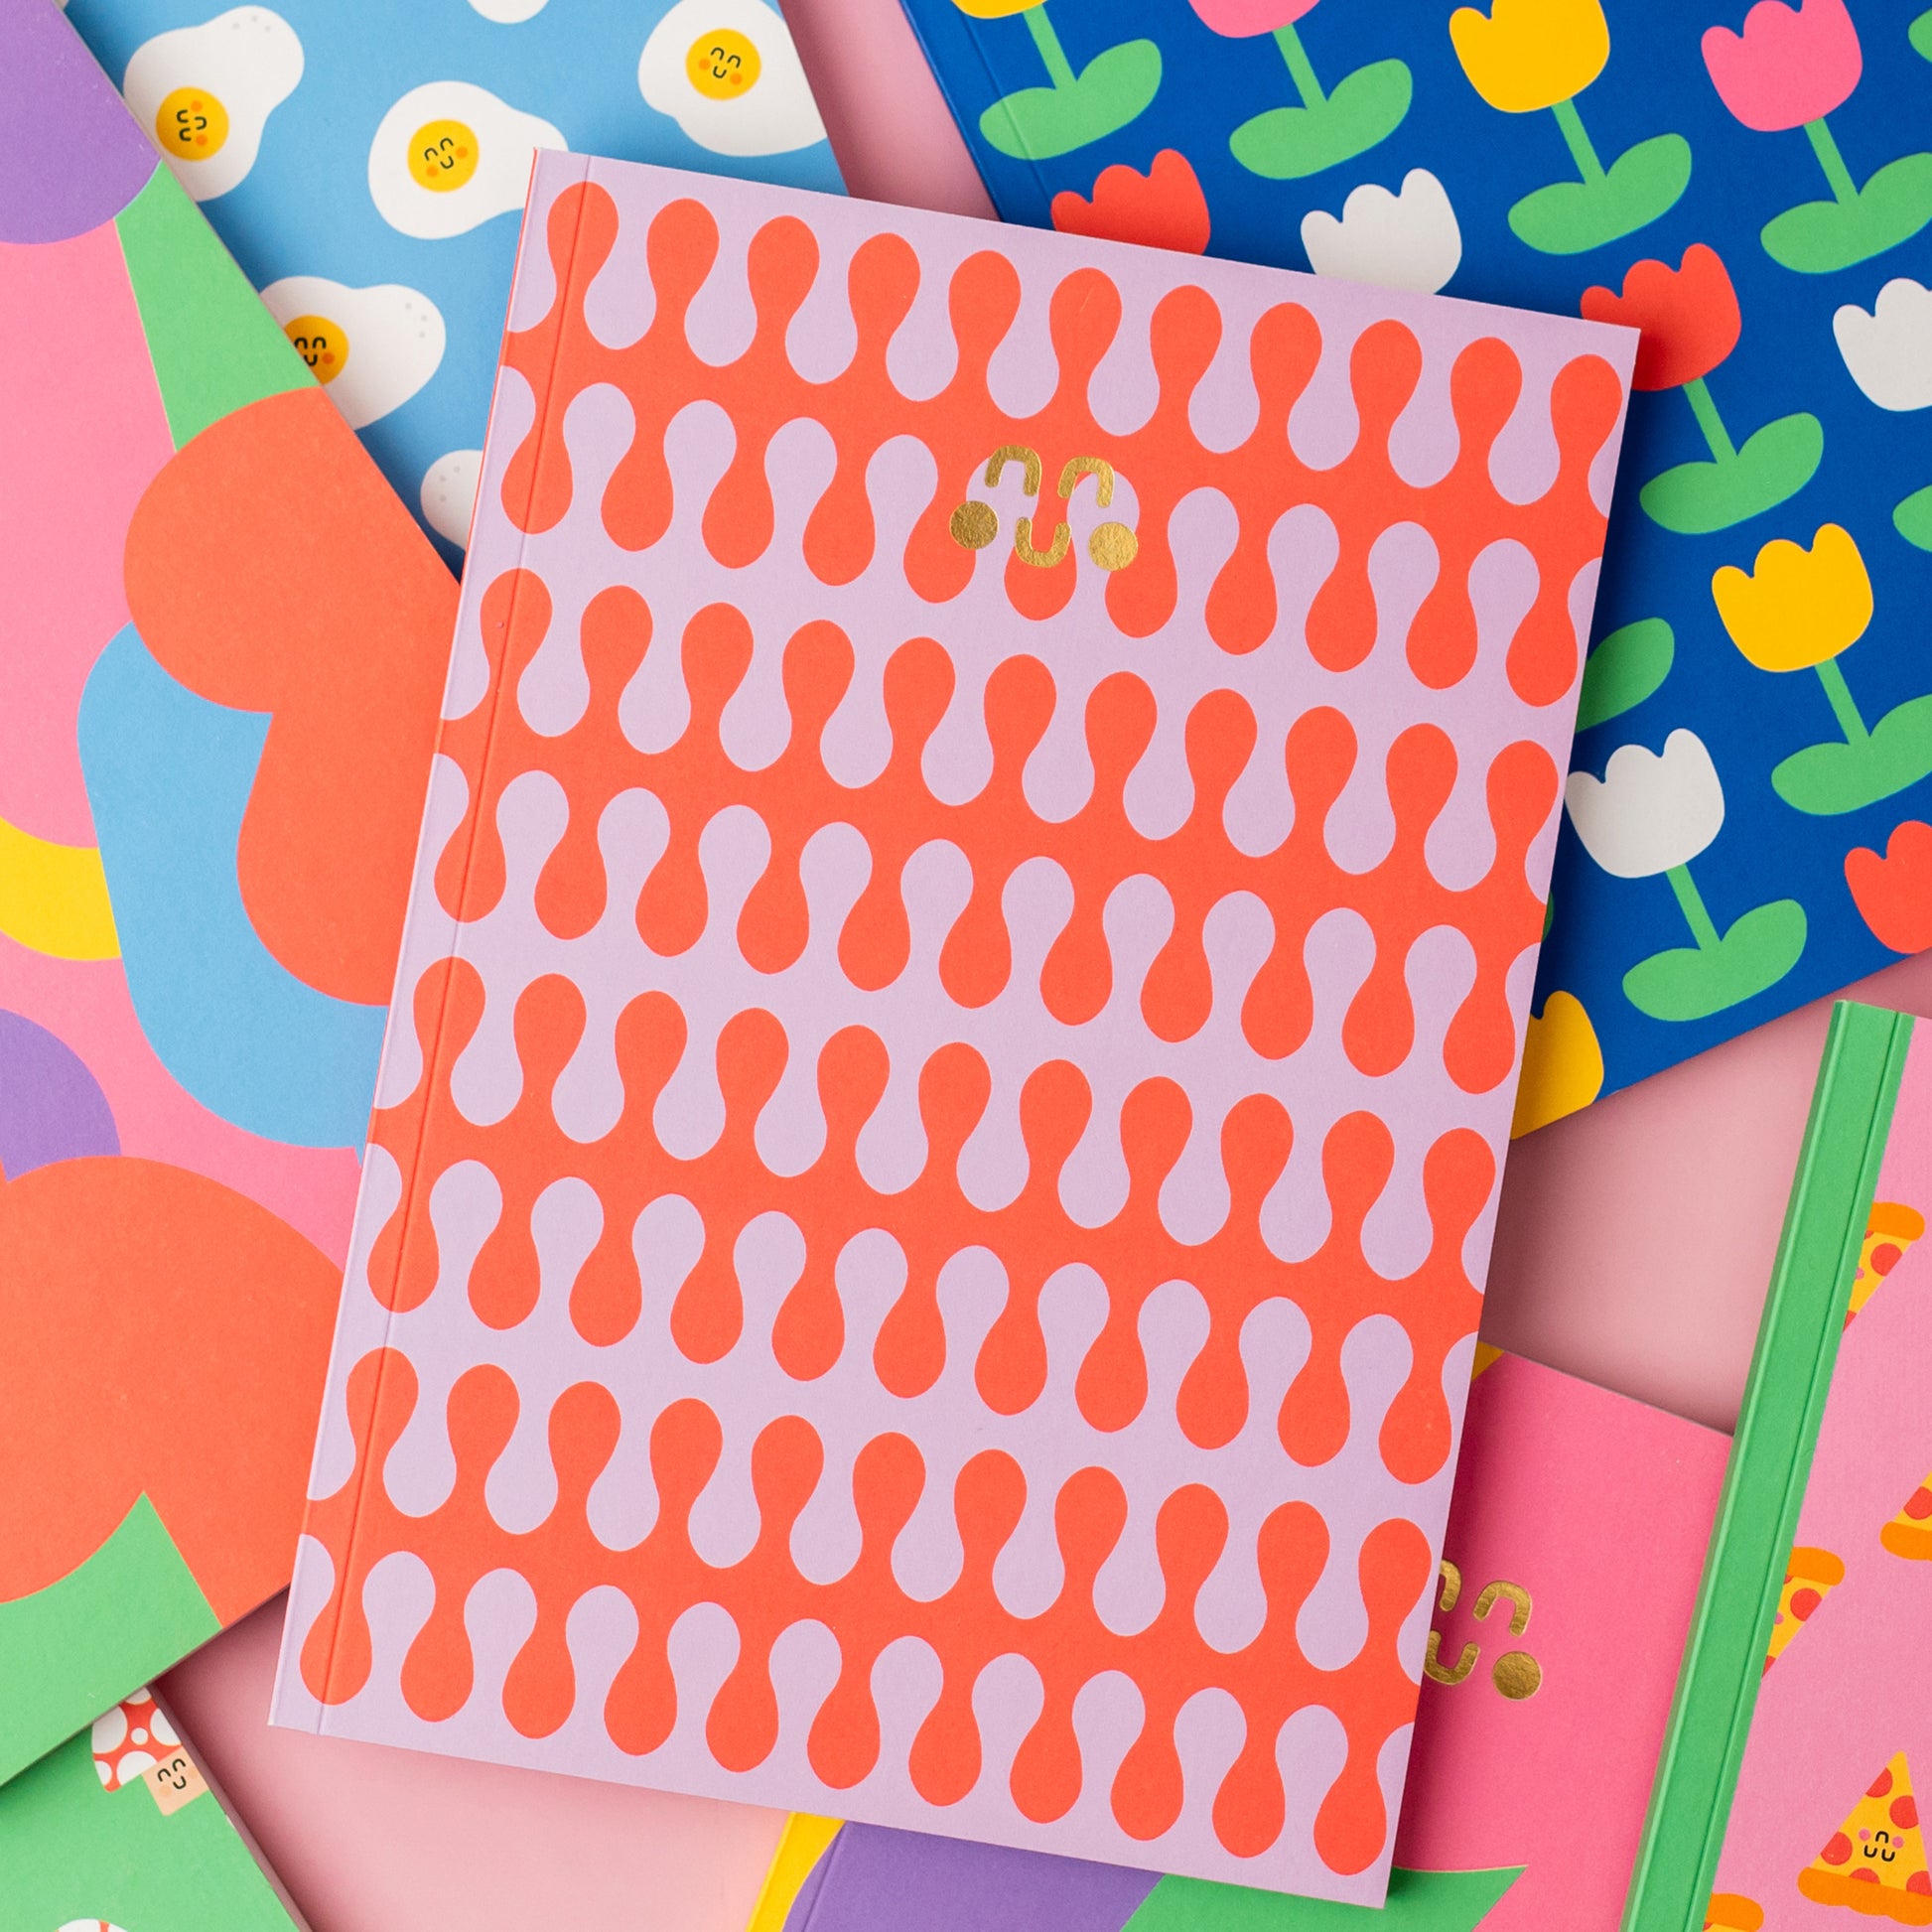 A collection of colorful notebooks with gold foil in a variety of patterns